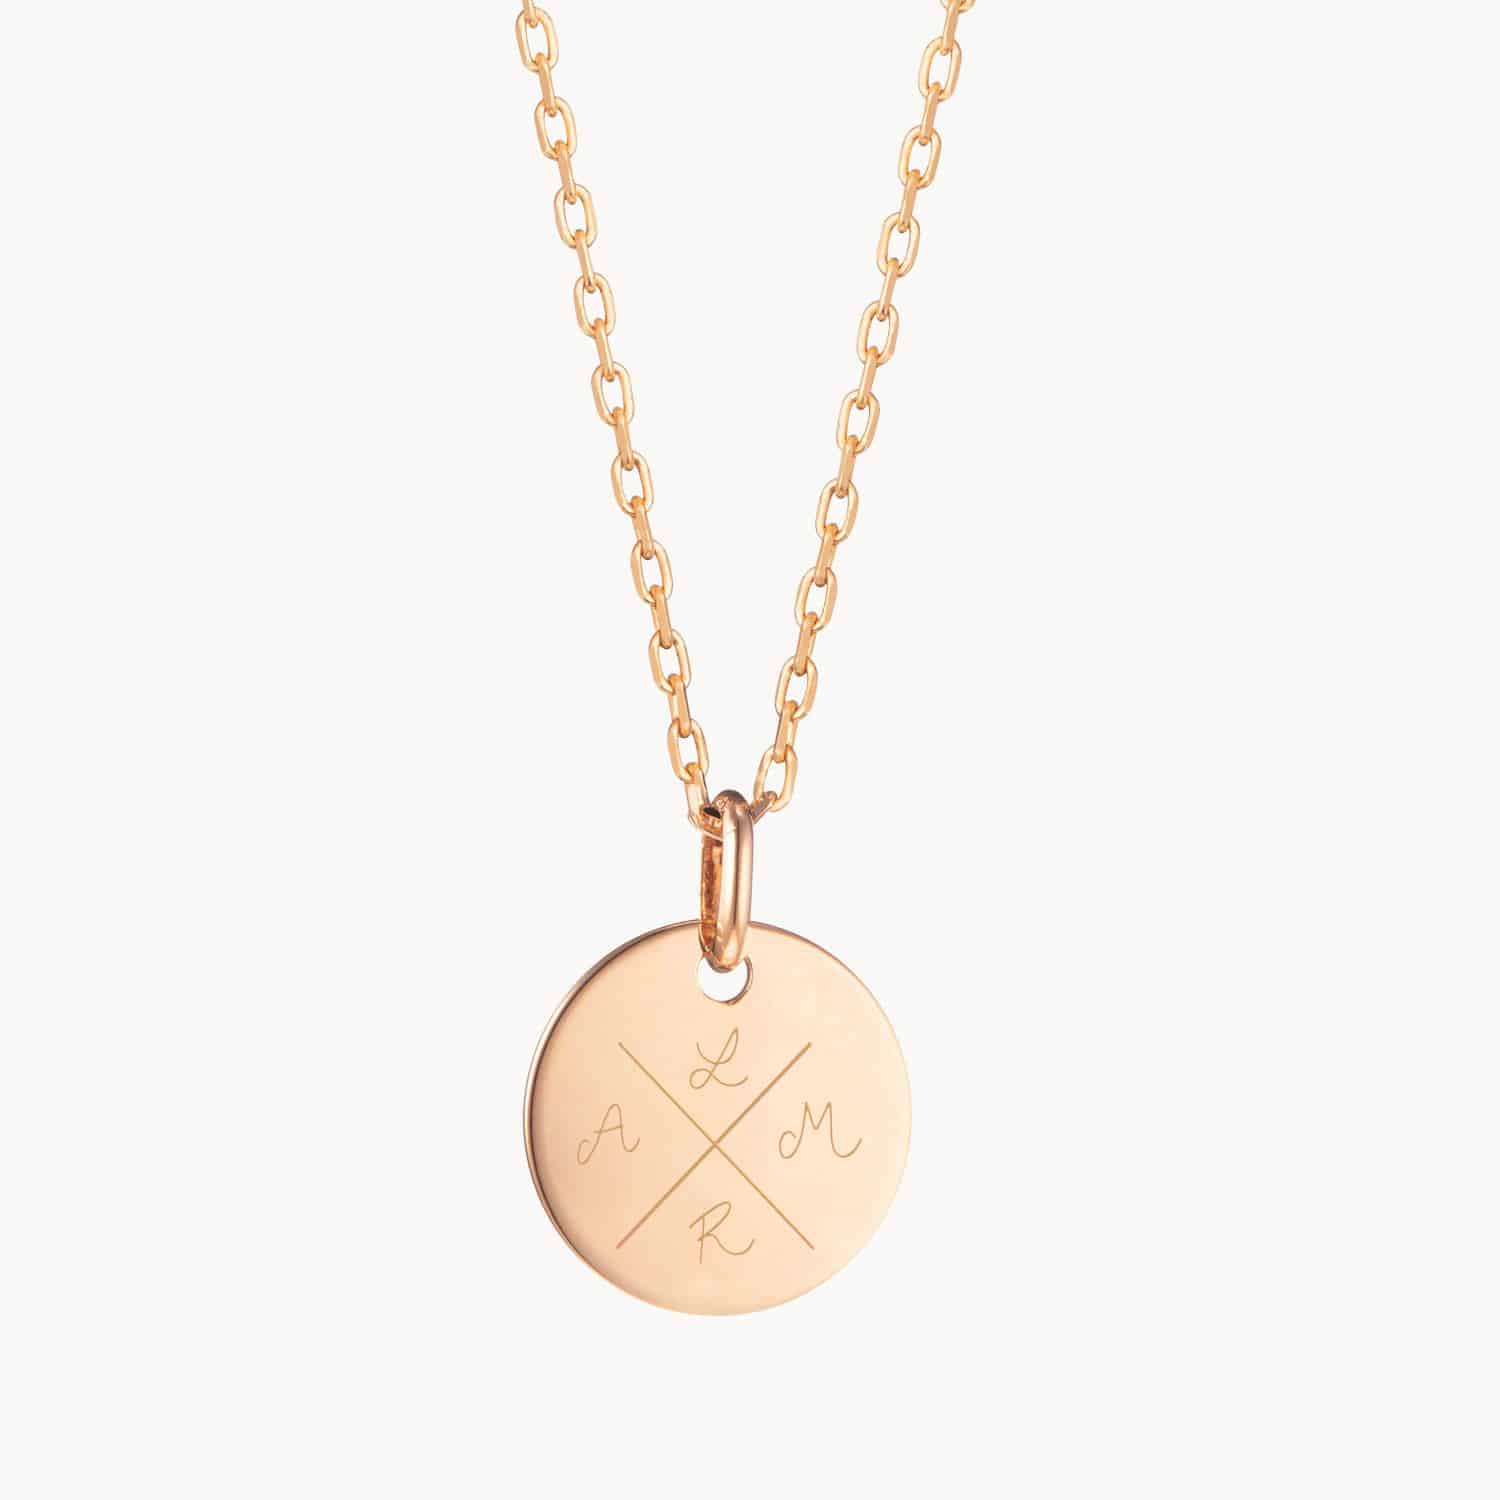 Compass Necklace Small Disc Gold Packshot Copy